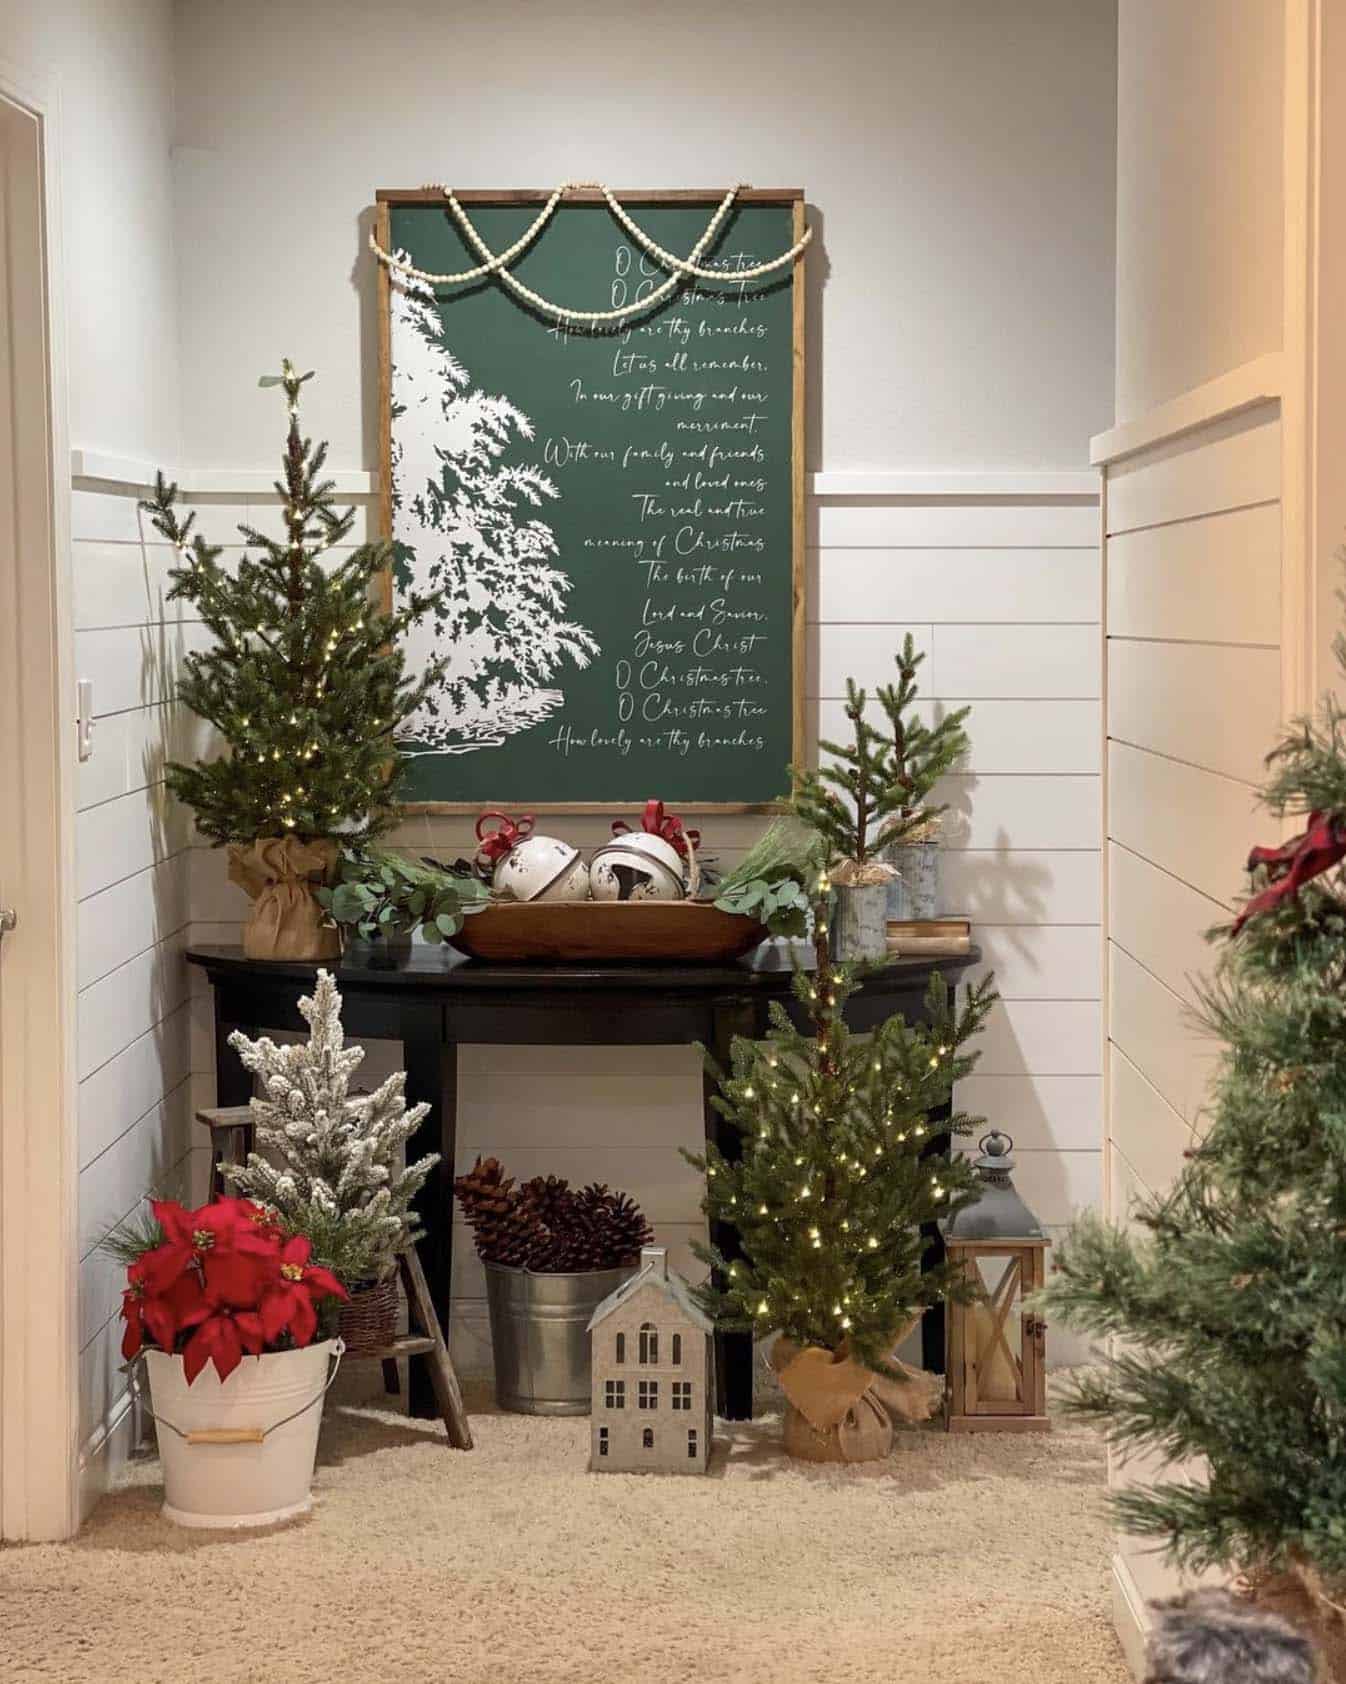 hallway decorated with a large Christmas sign, trees, and giant bells in a dough bowl